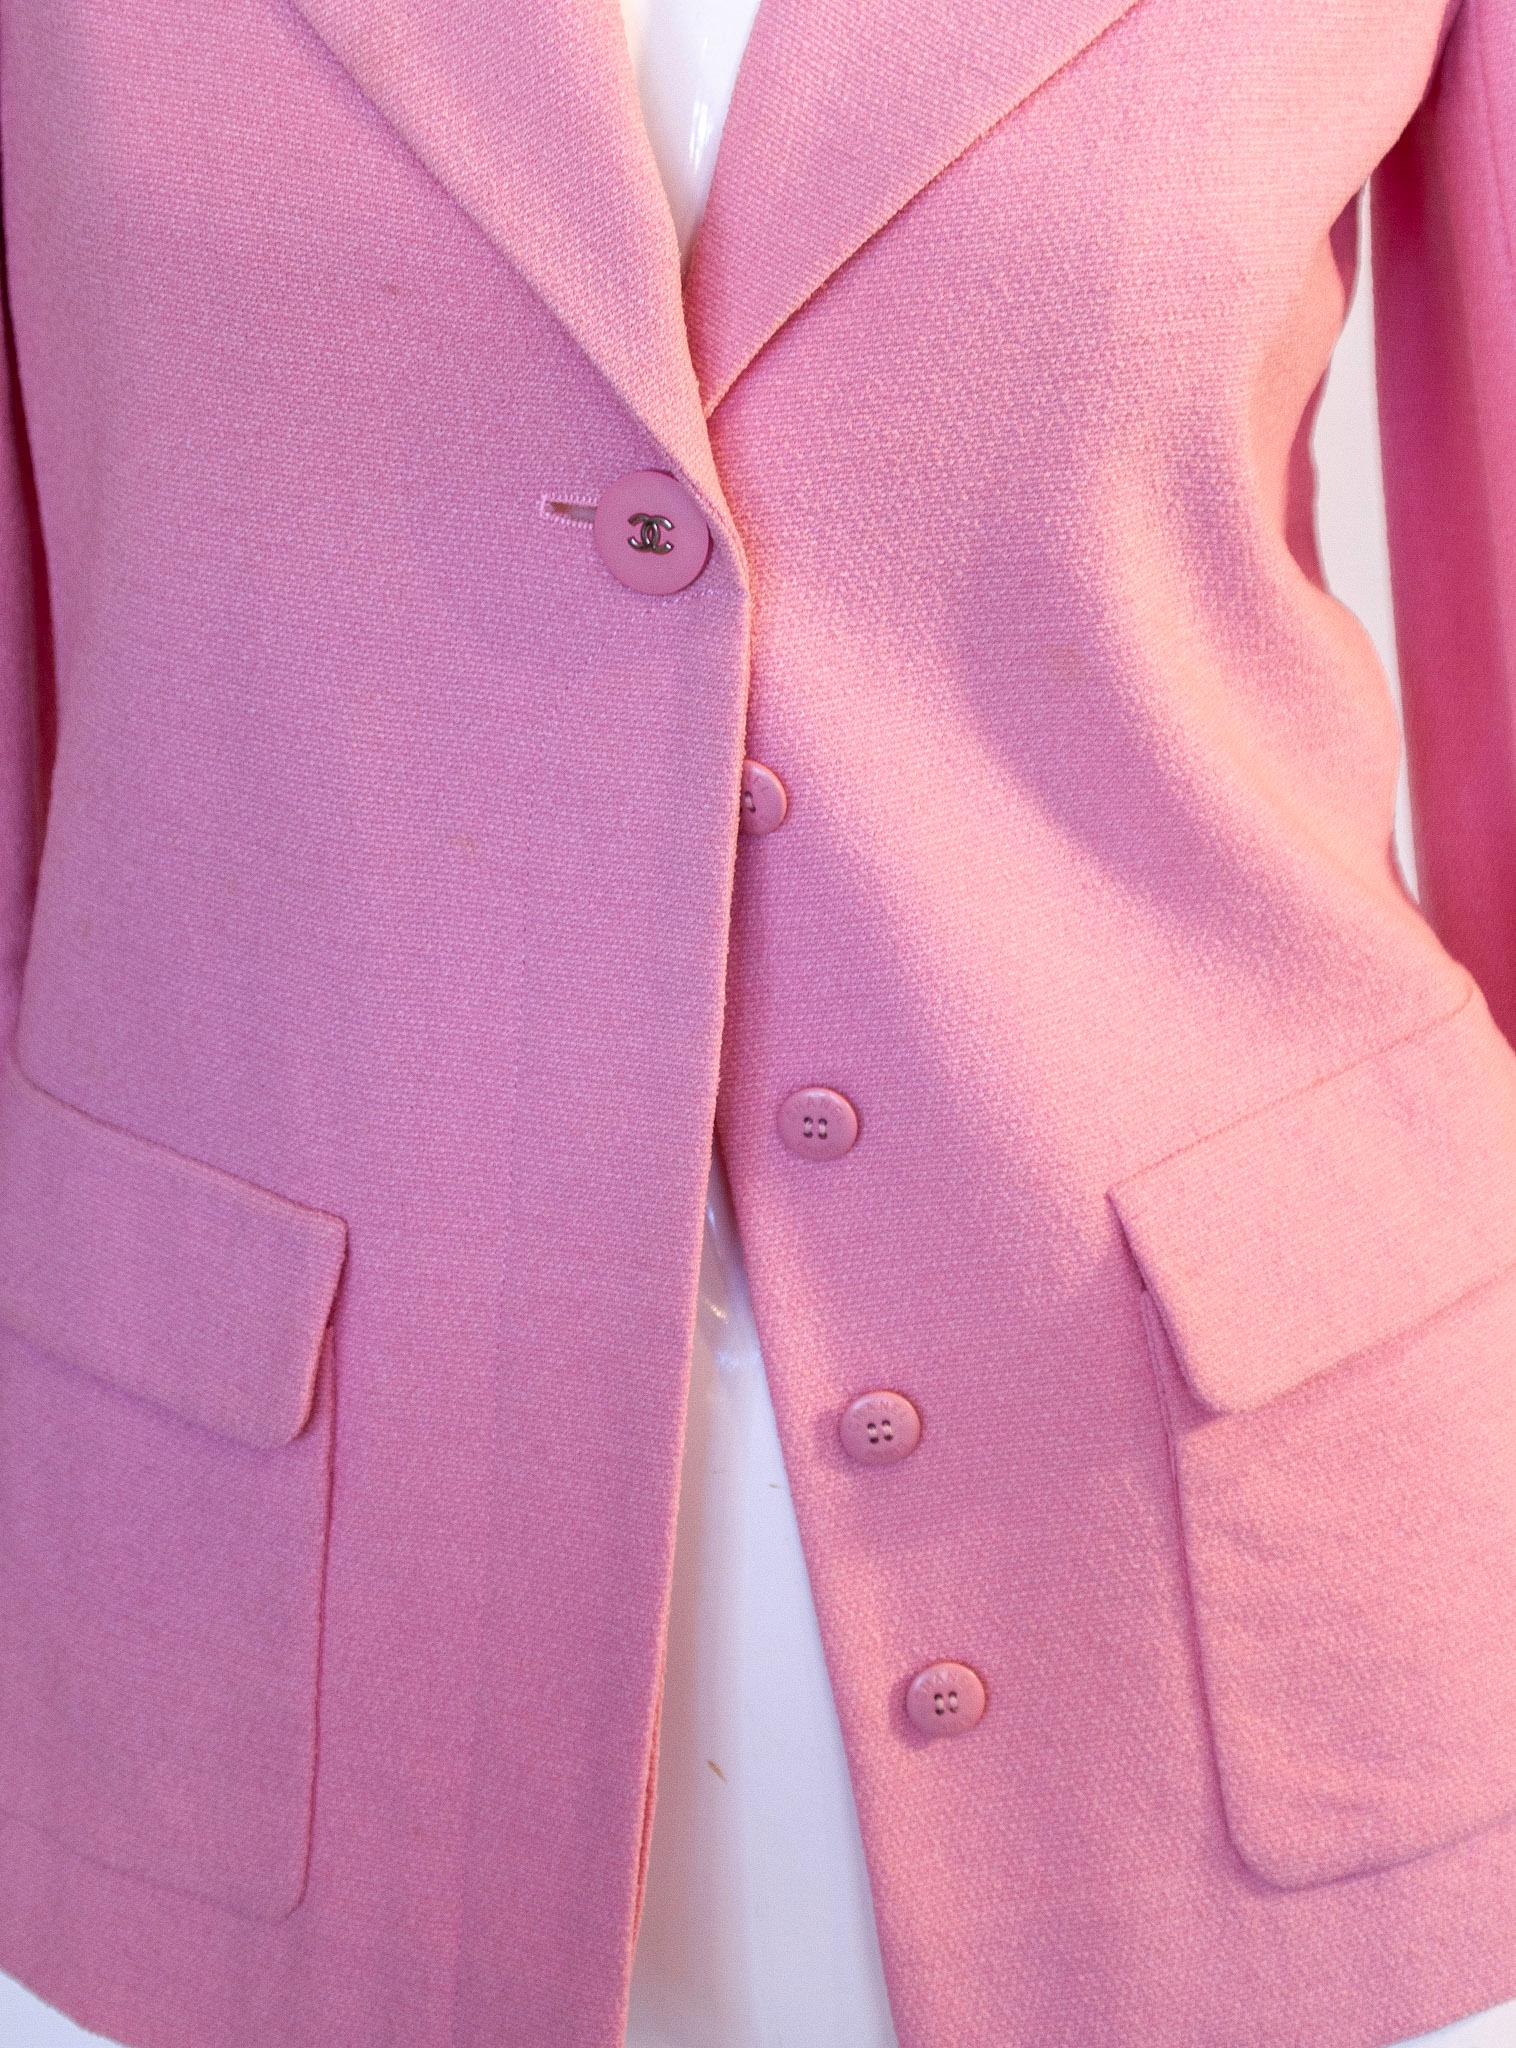 Chanel Boutique 1998 Cruise Collection Pink Blazer  For Sale 5